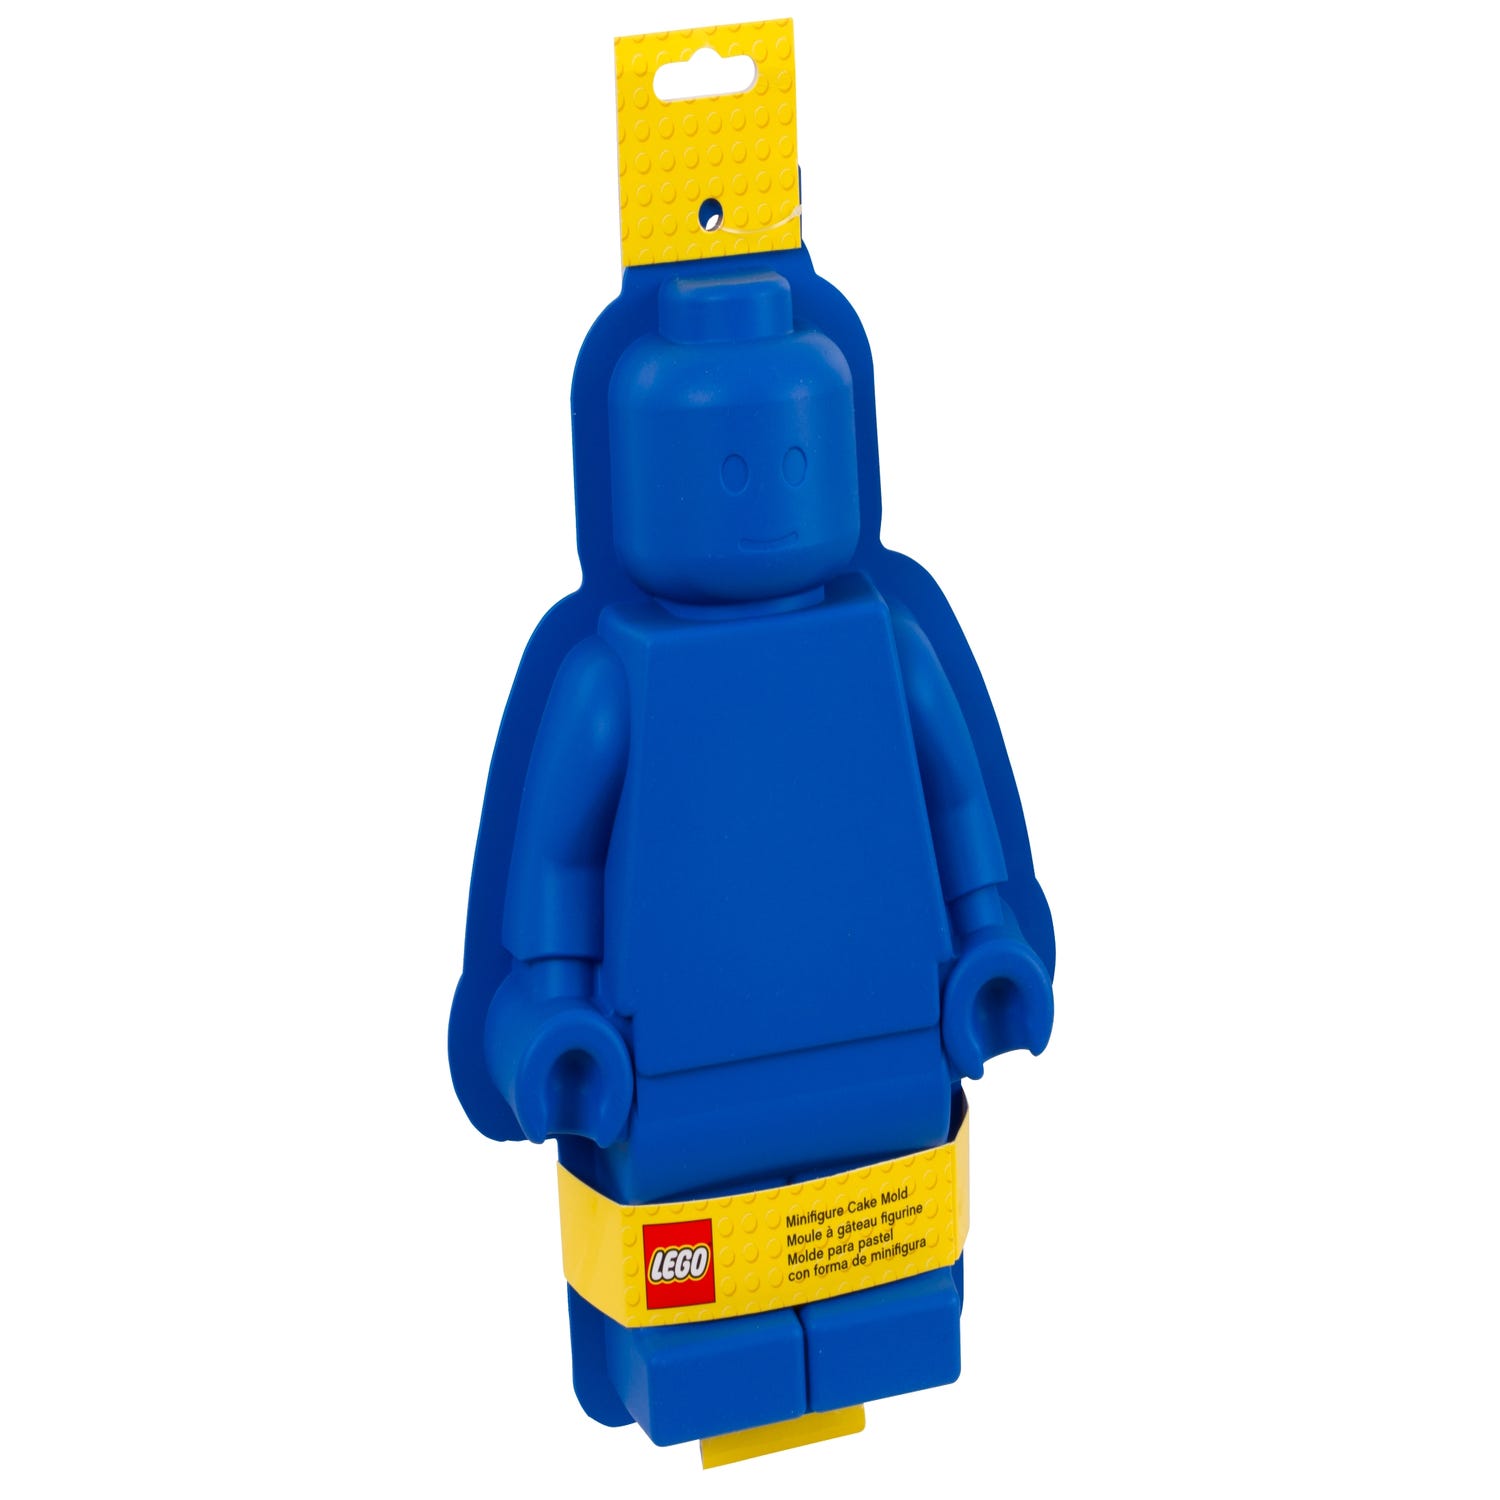 Minifigure Cake Mold Unknown Buy Online At The Official Lego Shop De